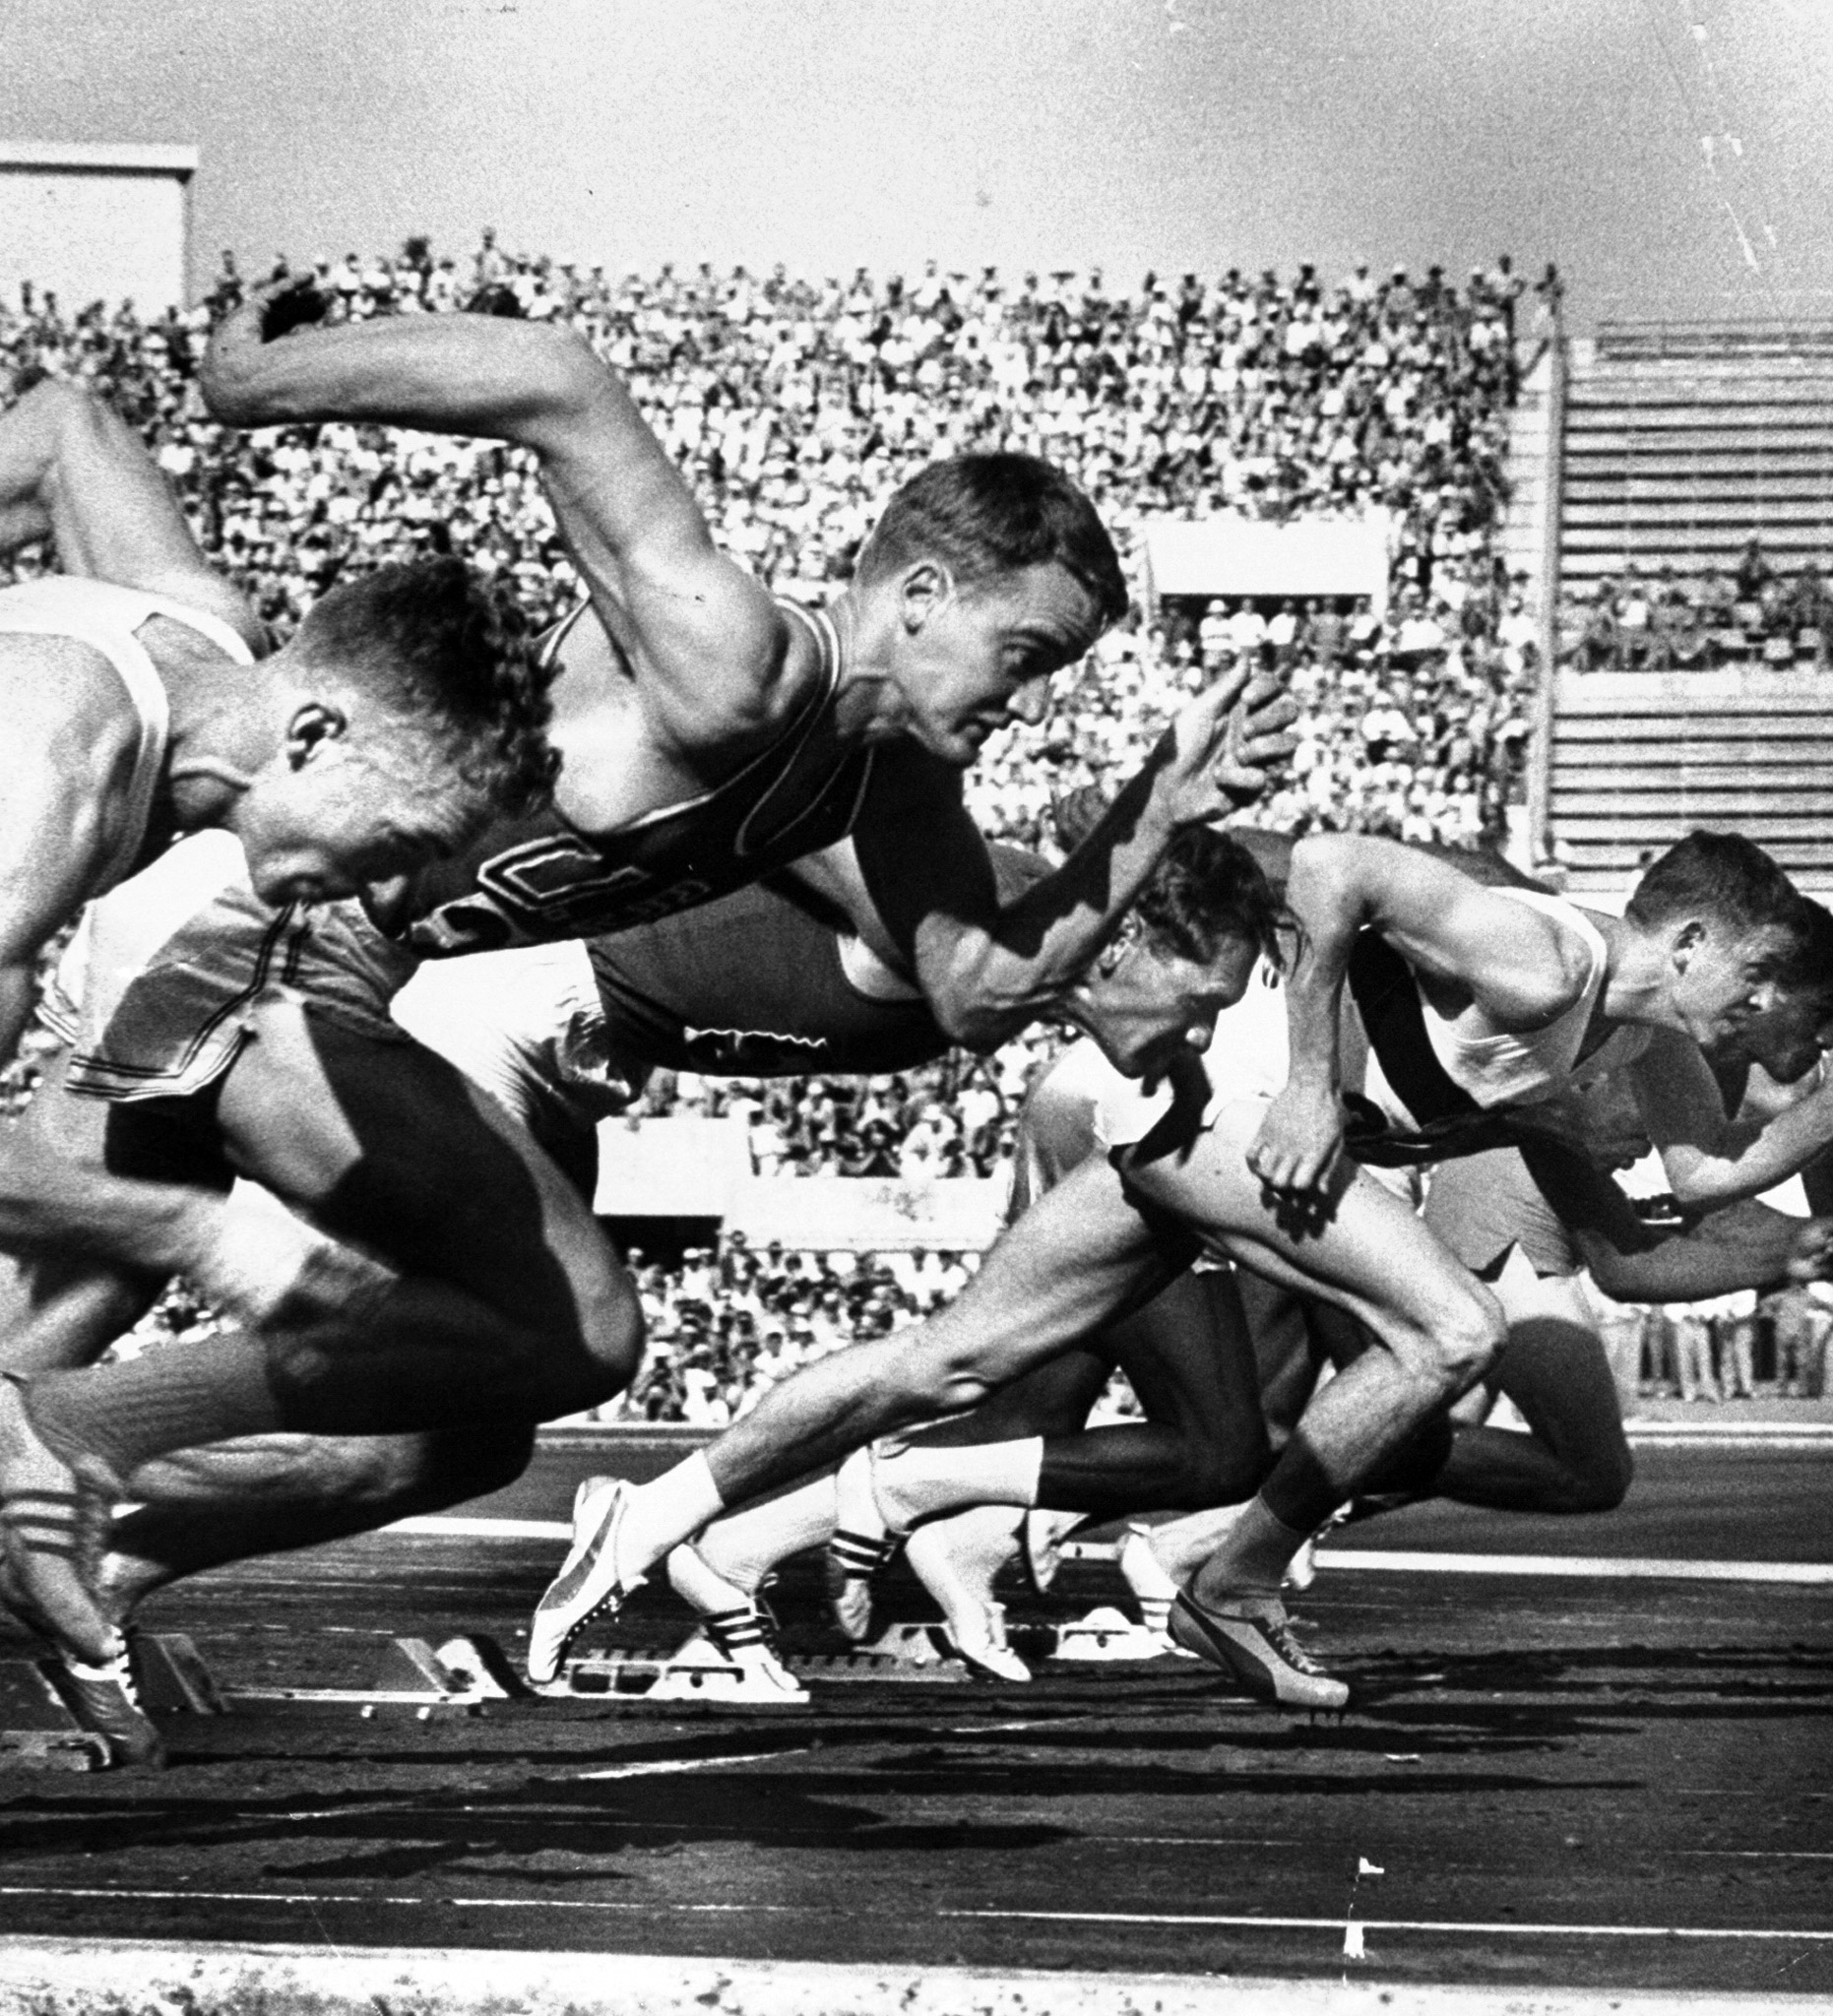 German Armin Harry (C) during men's 100-meter dash event at the 1960 summer Olympics in Rome, Italy.